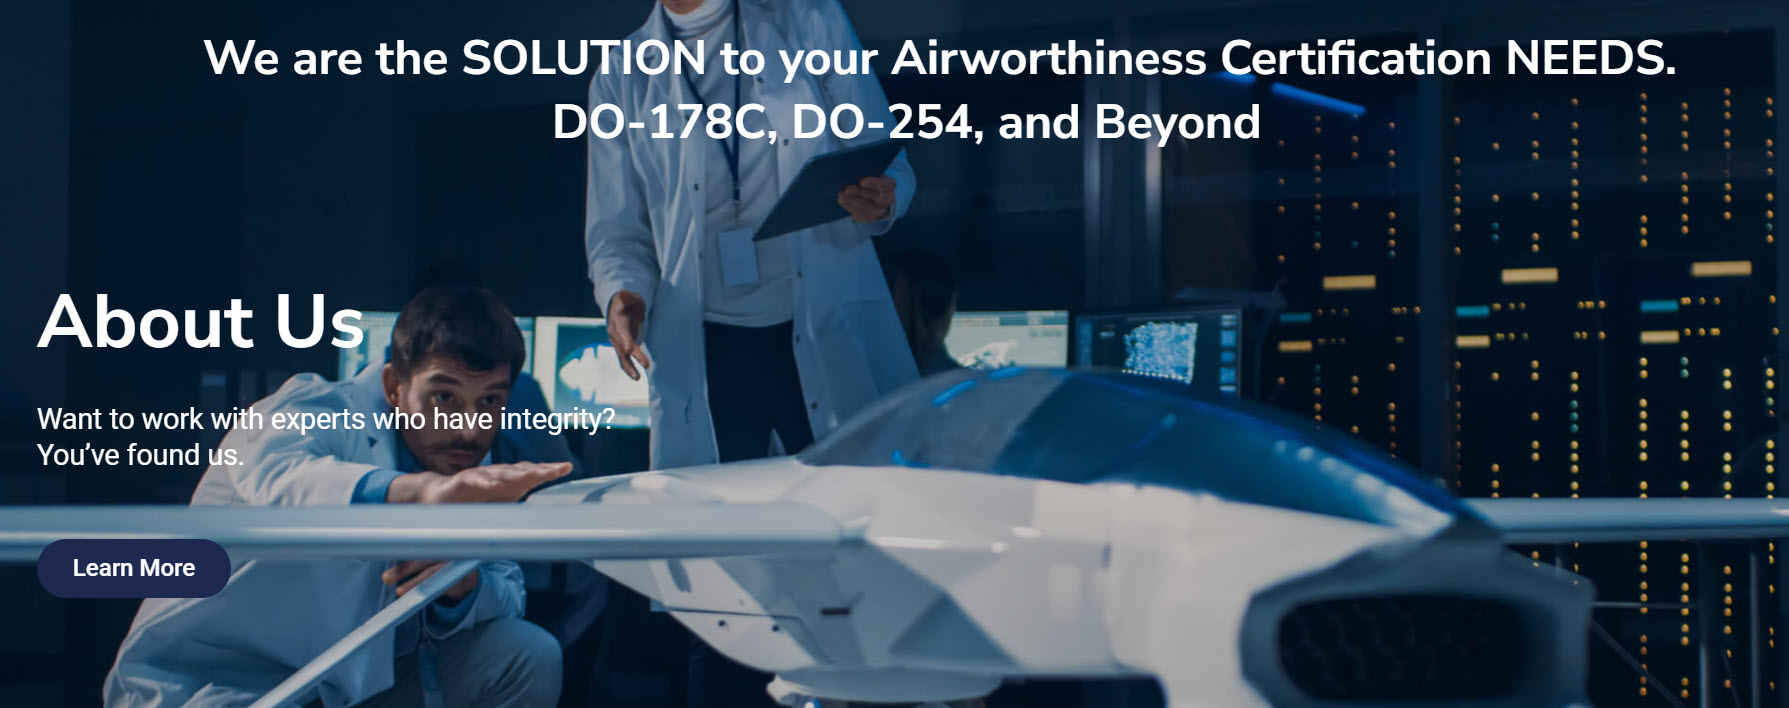 Software/DO 178C Training Course Airworthiness Certification Services